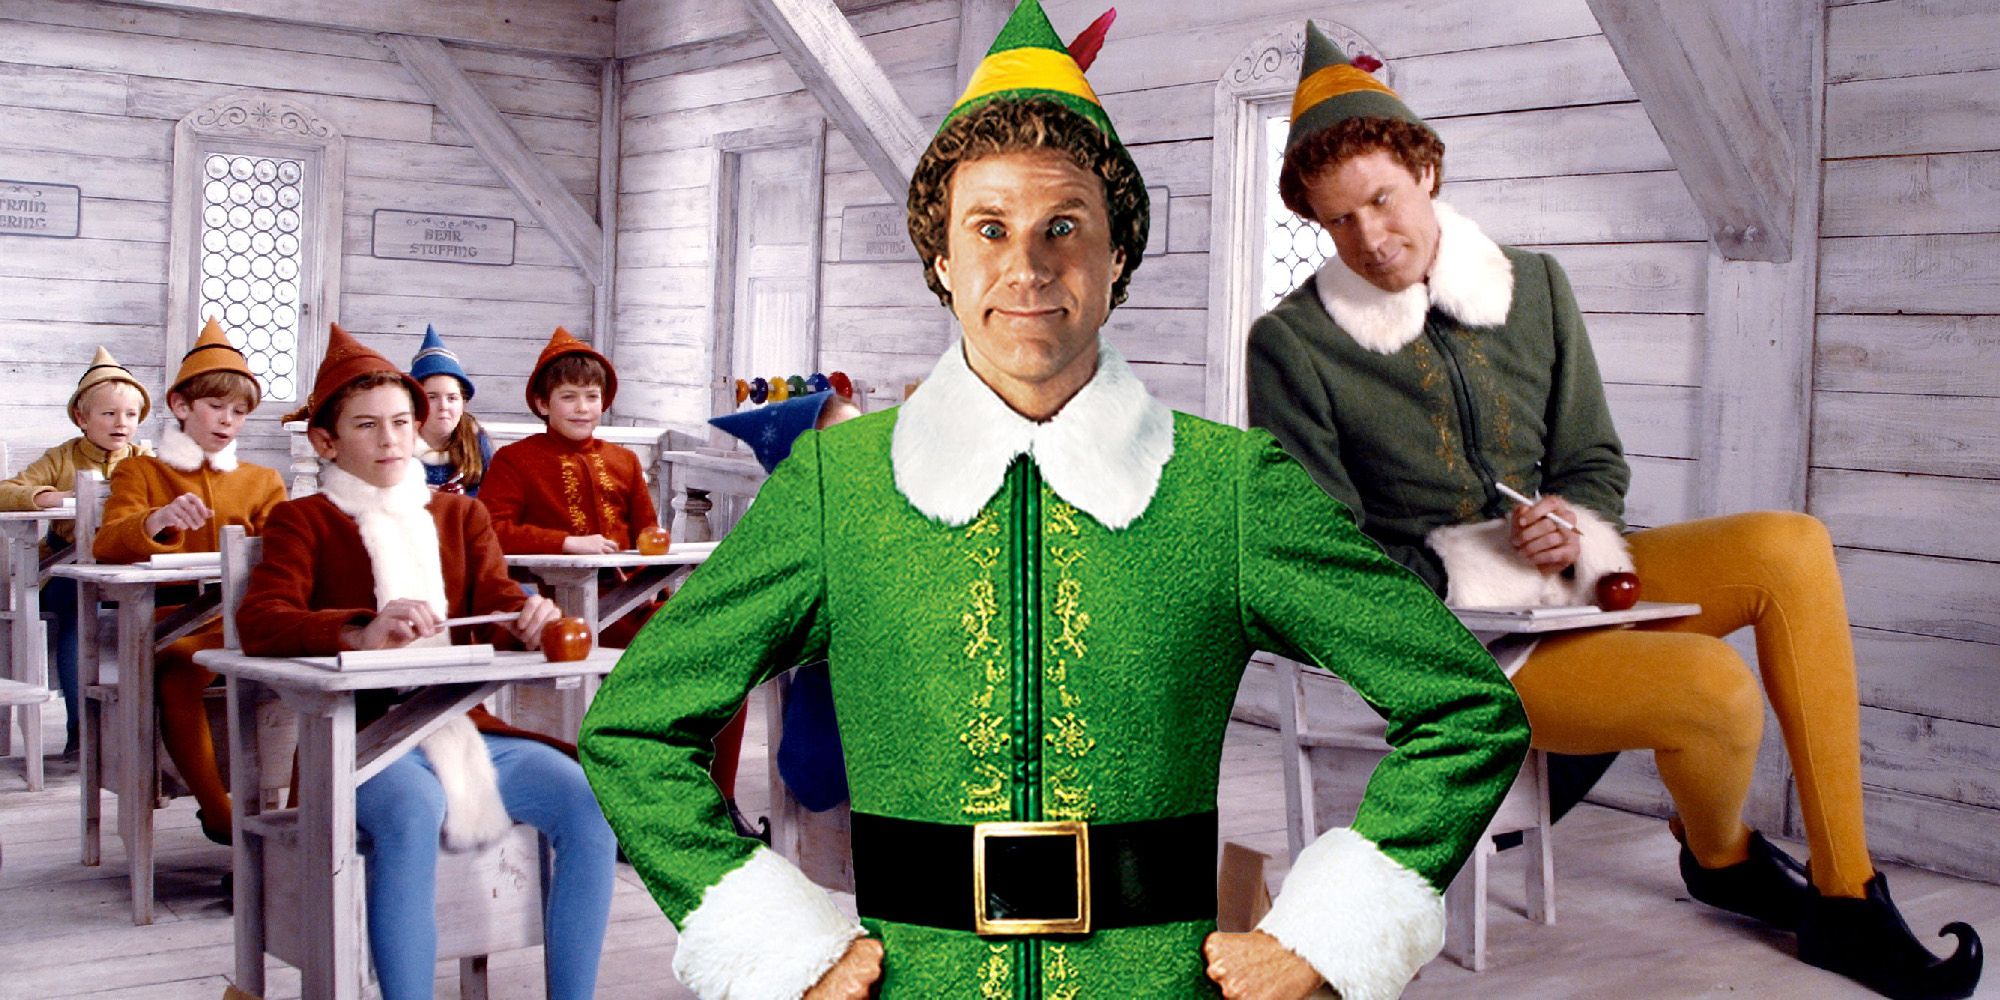 How Elf Made Will Ferrell Look So Much Bigger Than Other Elves